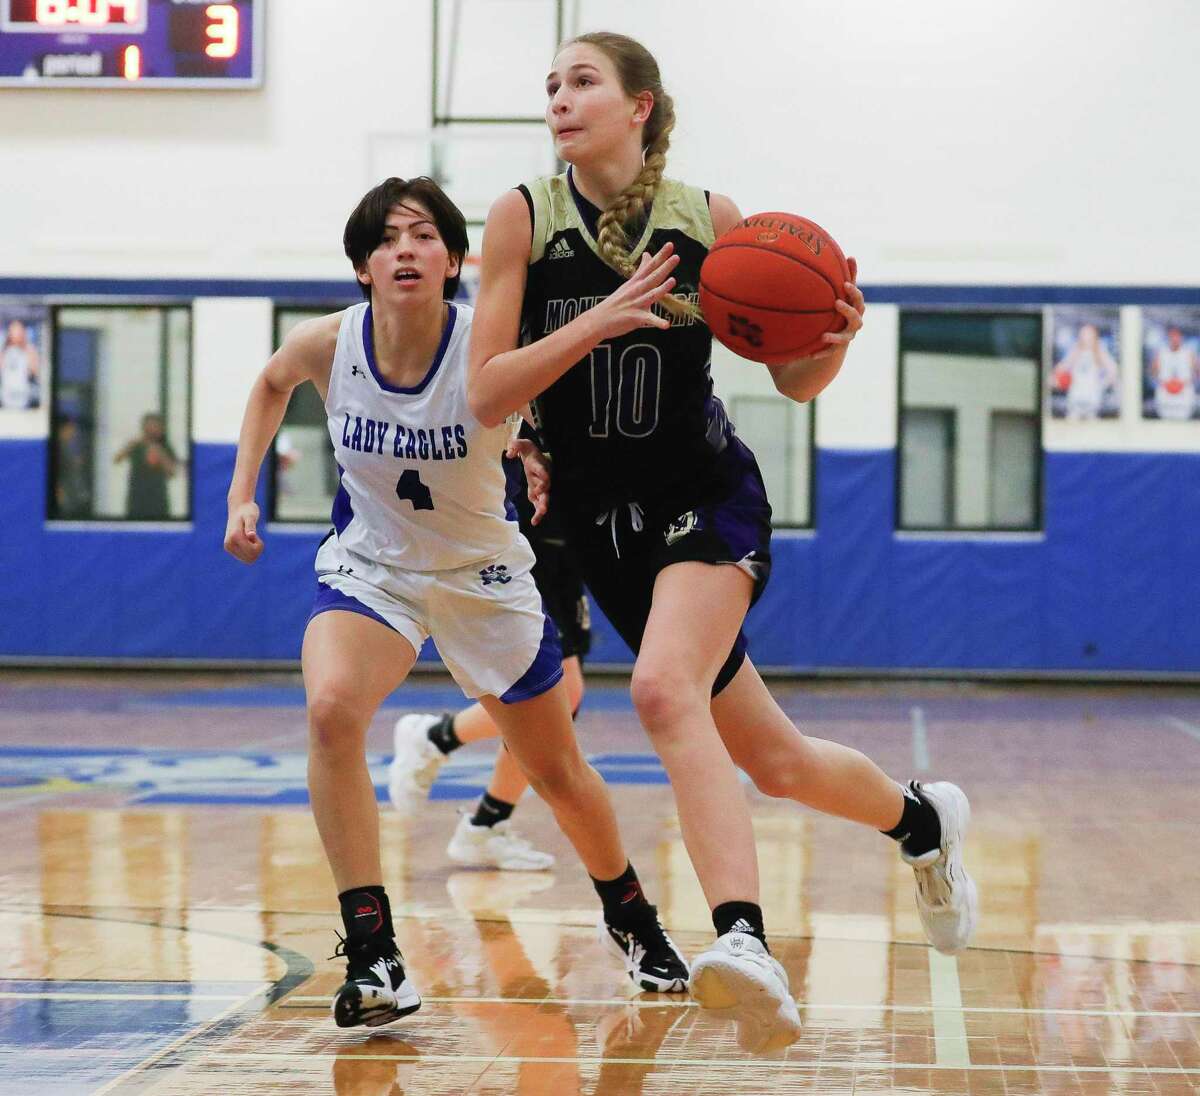 Montgomery point guard Savannah Piro (10) drives past New Caney small forward Tori Perales (4) during the first quarter of a high school basketball game at New Caney High School, Friday, Dec. 17, 2021, in New Caney.